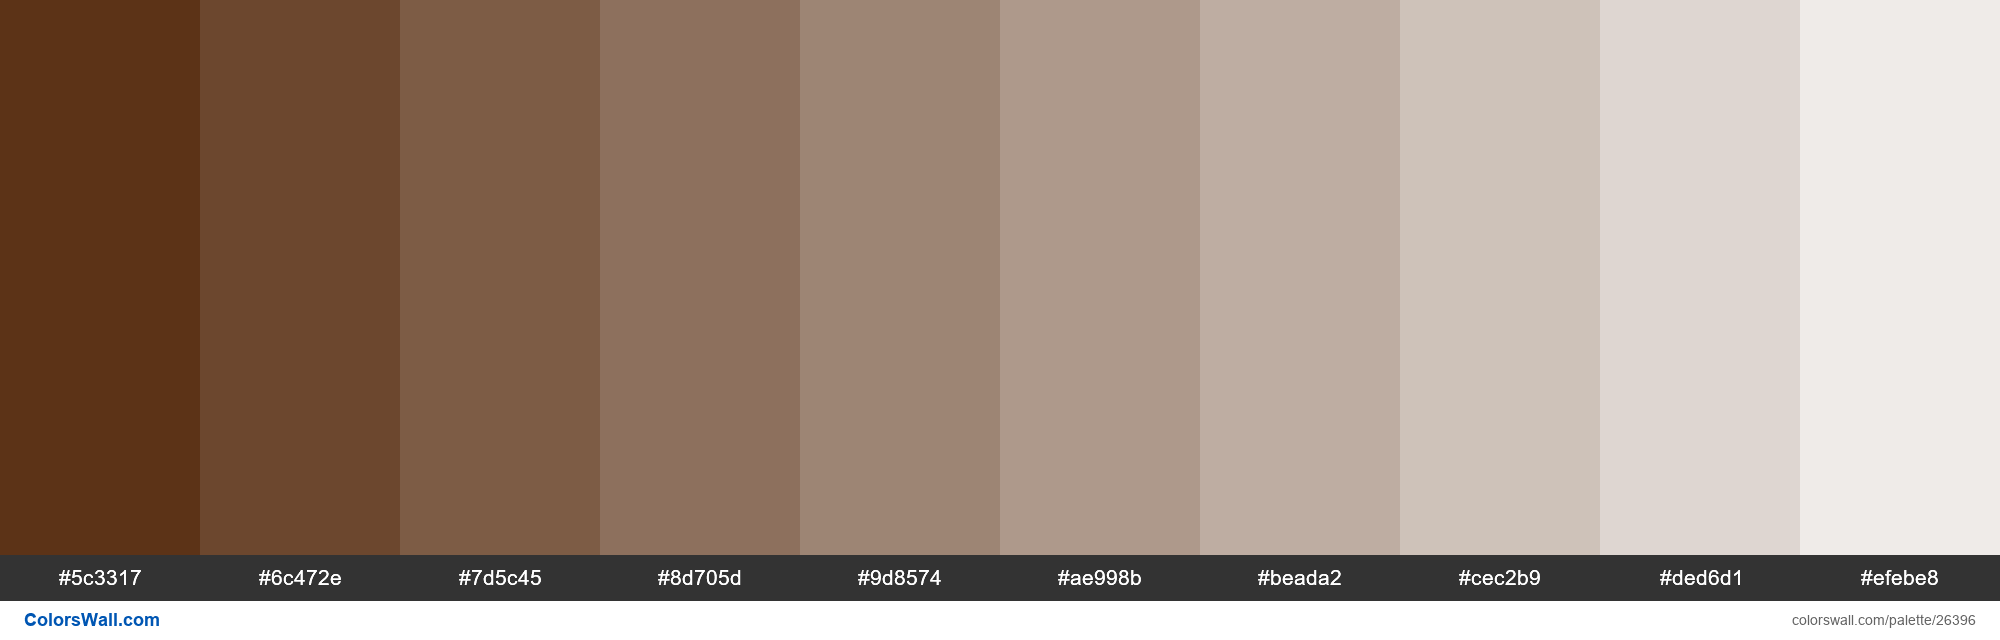 Tints Of Bakers Chocolate Color 5c3317 Hex 26396 Colorswall 